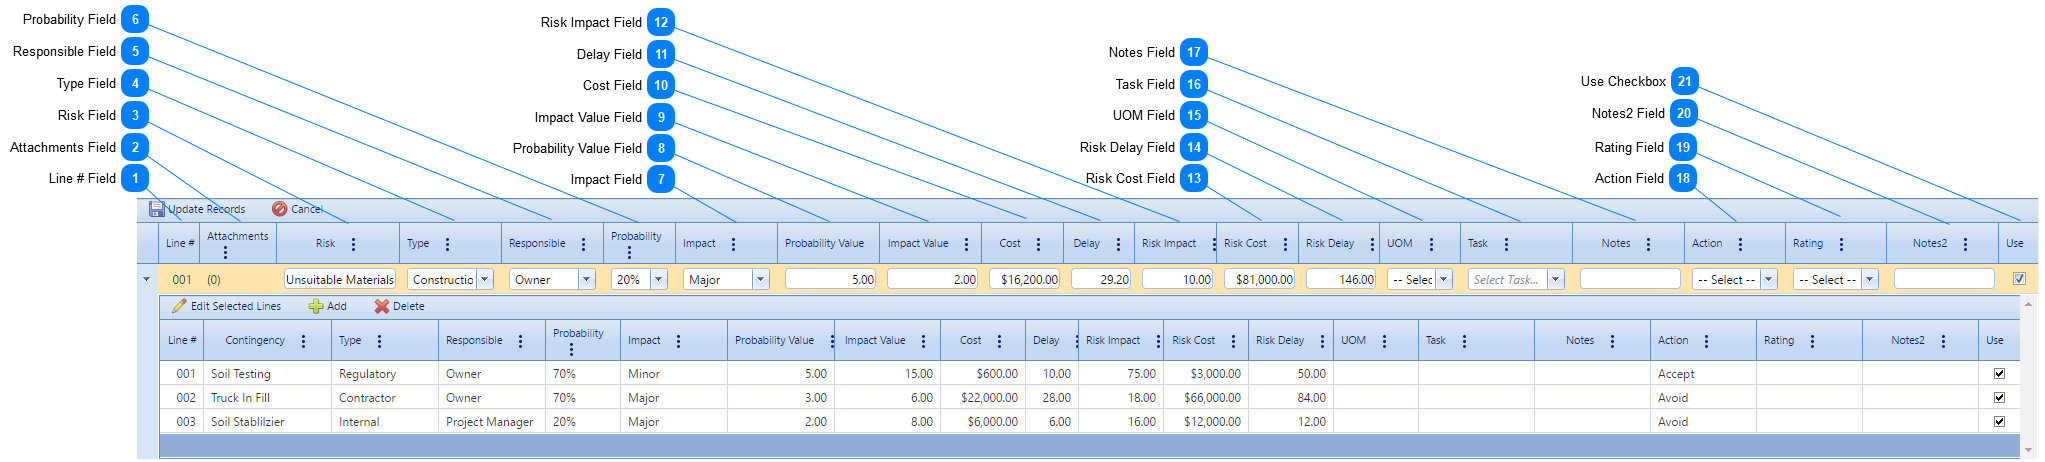 Risk Analysis Details Tab Table